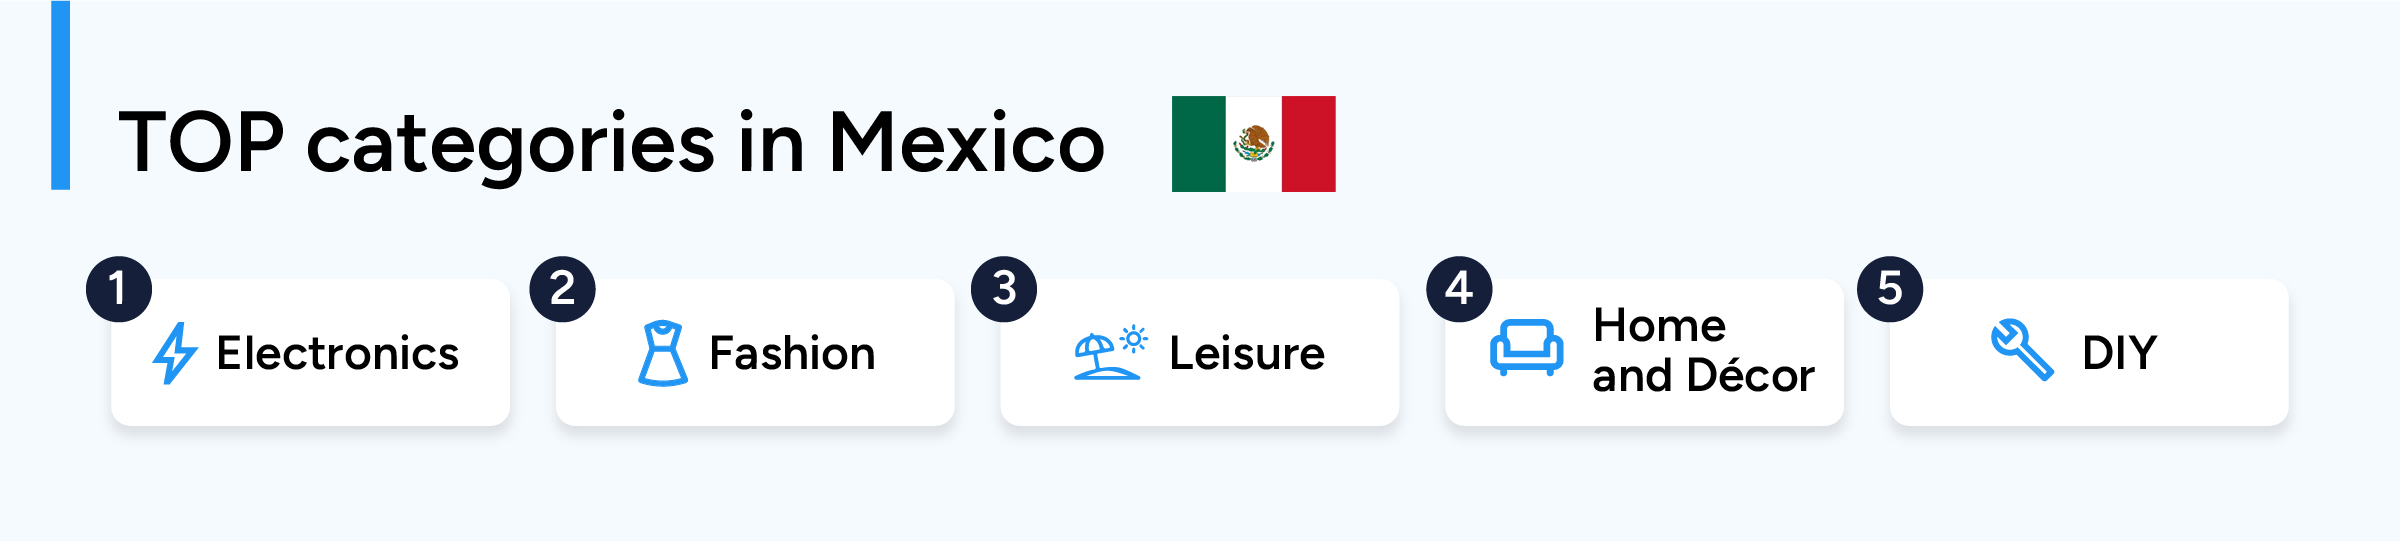 Top categories in Mexico